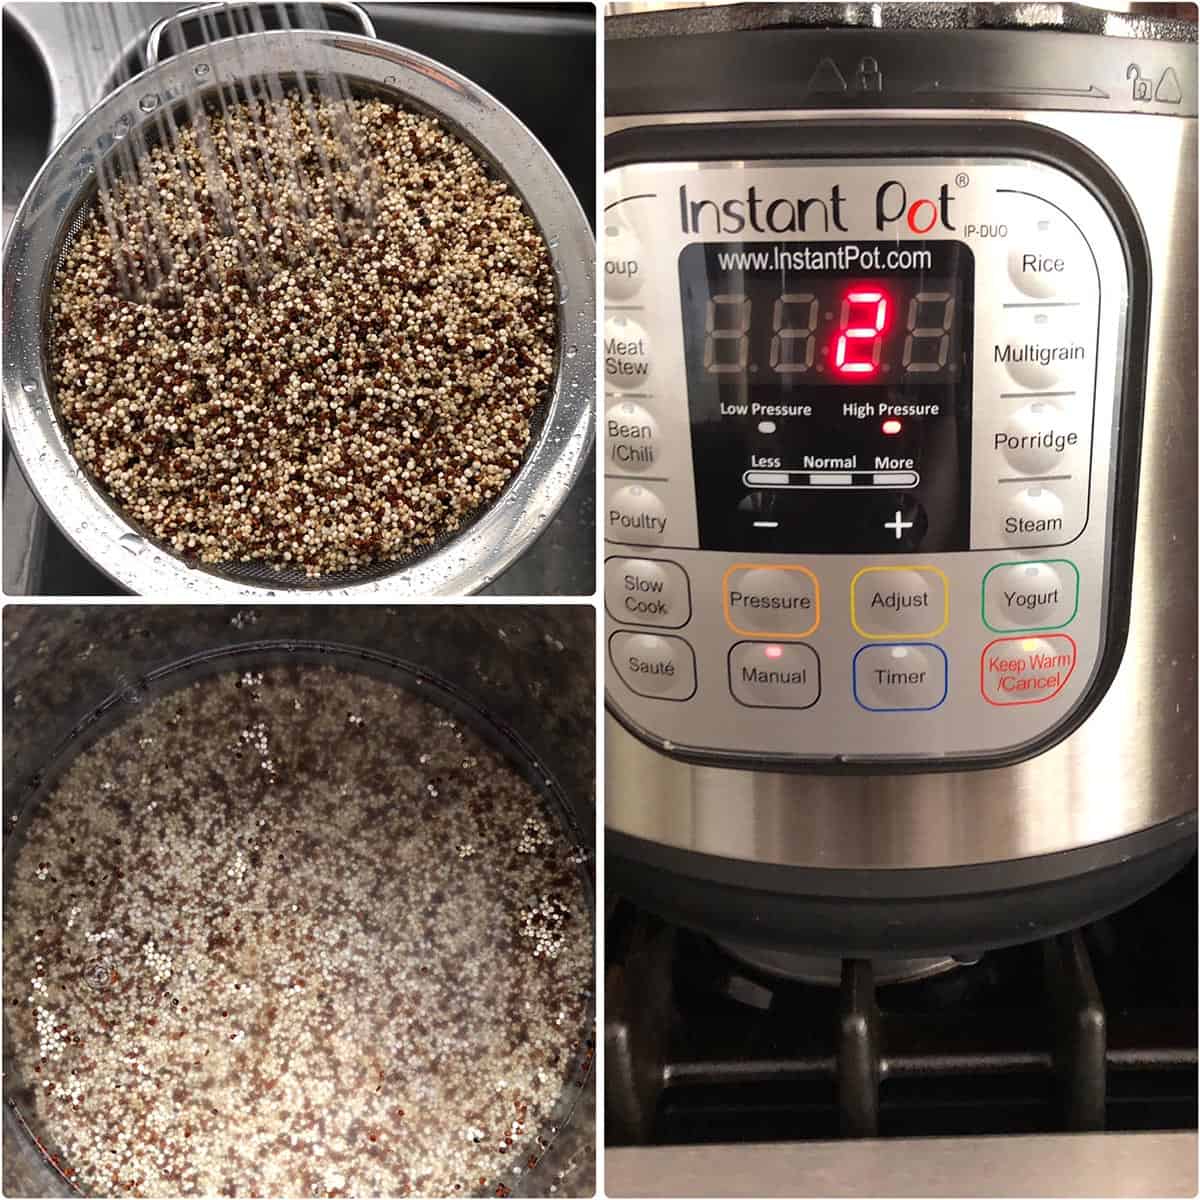 Rinsed quinoa with water cooked in Instant pot for 2 minutes